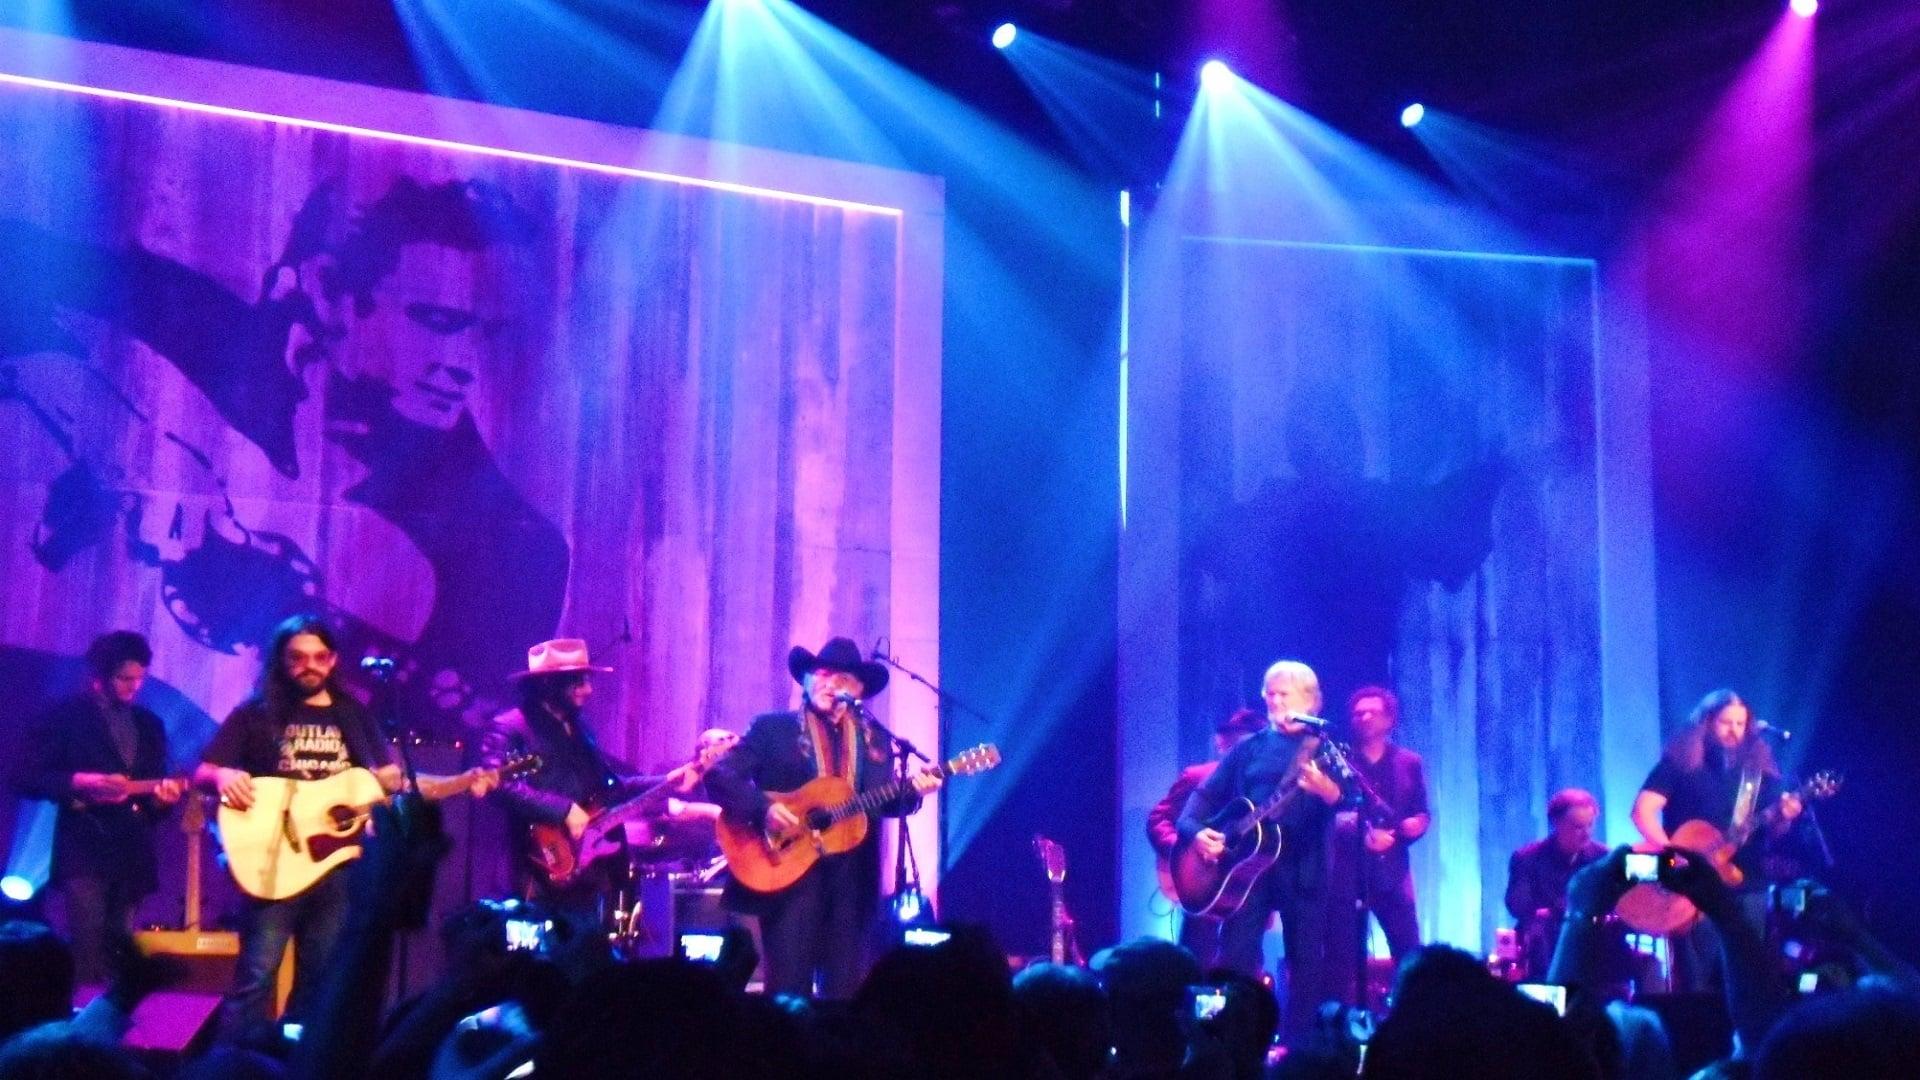 We Walk The Line: A Celebration of the Music of Johnny Cash backdrop